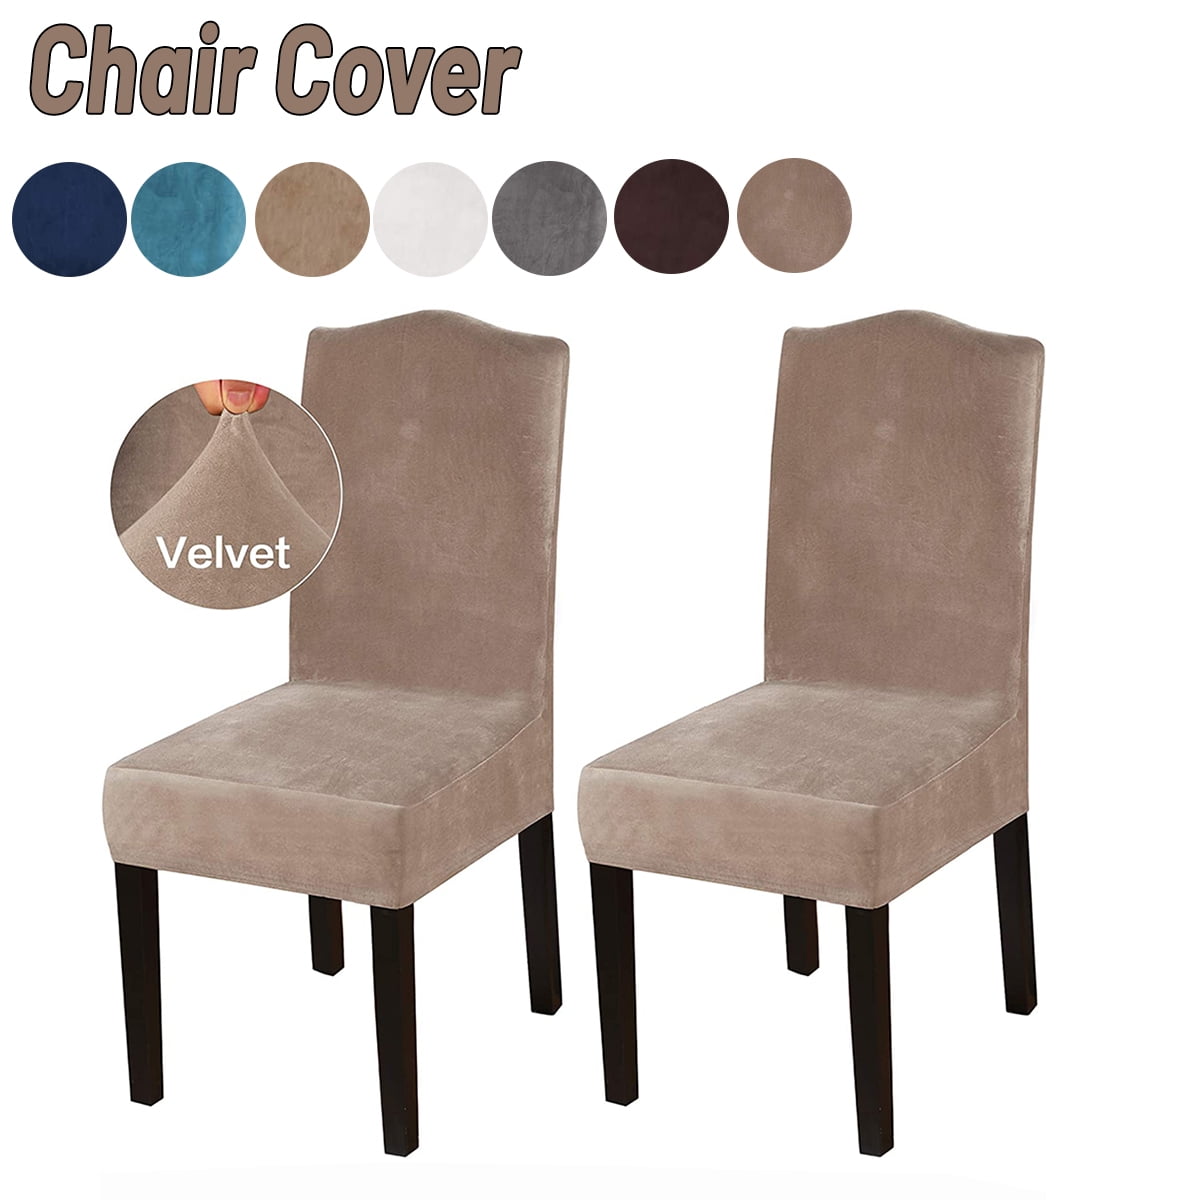 2pcs Luxury Velvet Chair Covers Super Soft Spandex Waterproof Fit Stretch Dining Room Chair Covers Washable Banquet Chair Seat Protector Slipcover For Party Hotel Wedding Ceremony Walmart Canada